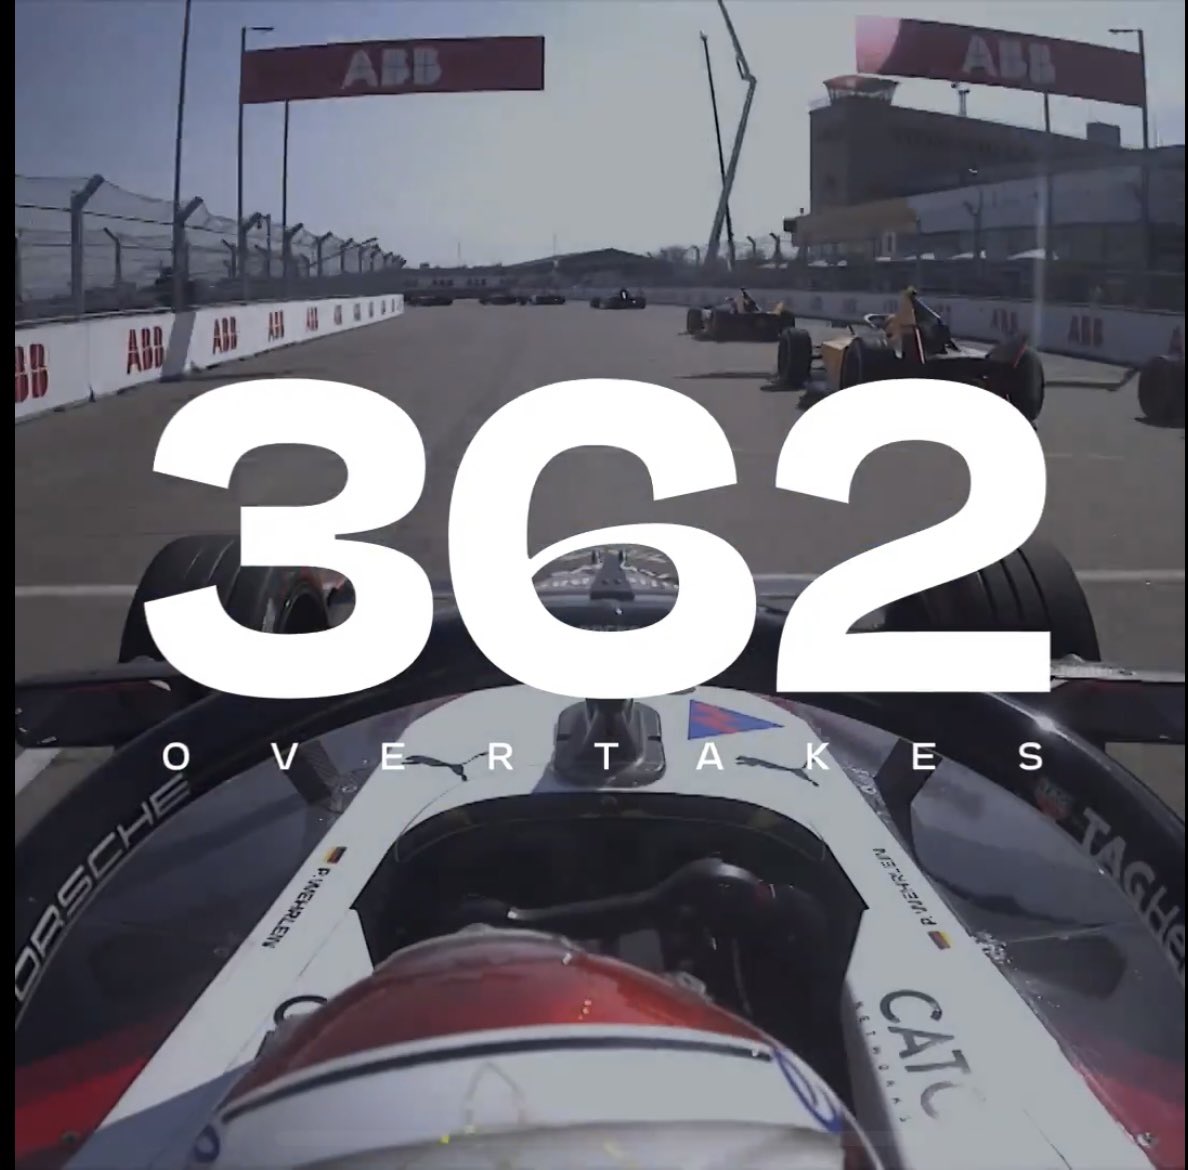 🏁 Action-packed 😮‍💨

Last season's Berlin E-Prix saw a colossal 

362 overtakes! 🚗💨

How many could we expect at the 2024 SUNMINIMEAL Berlin E-Prix next weekend? 🤔

#feinsider #nissanproud #nissanemployee #nissanev #sustainability #environmentalsustainability